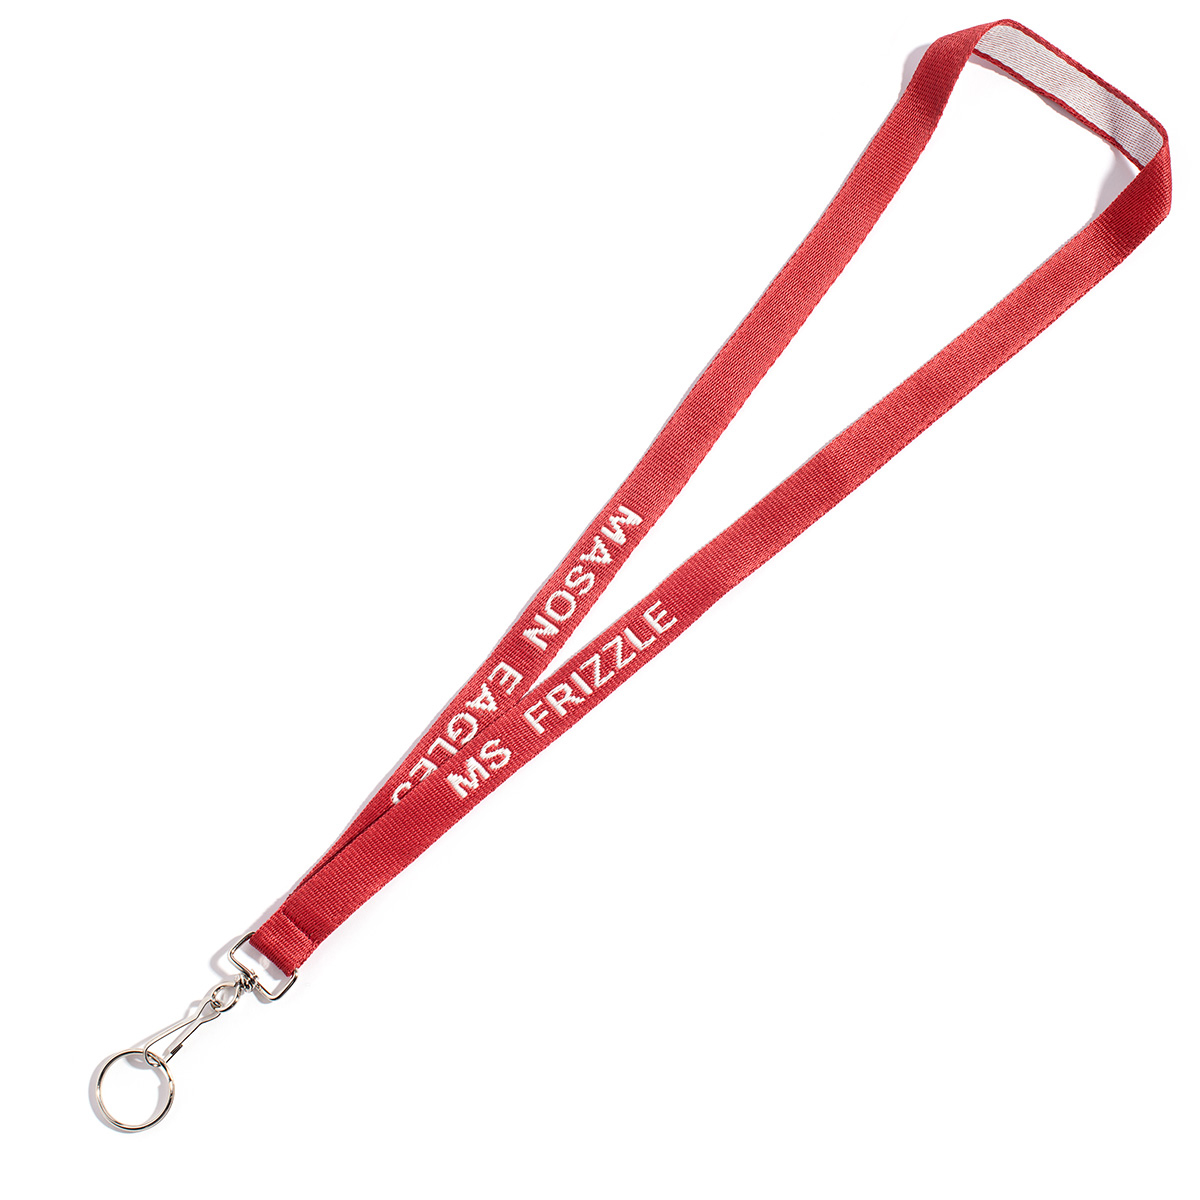 Lowest price on lanyards at Absolute Access ID.